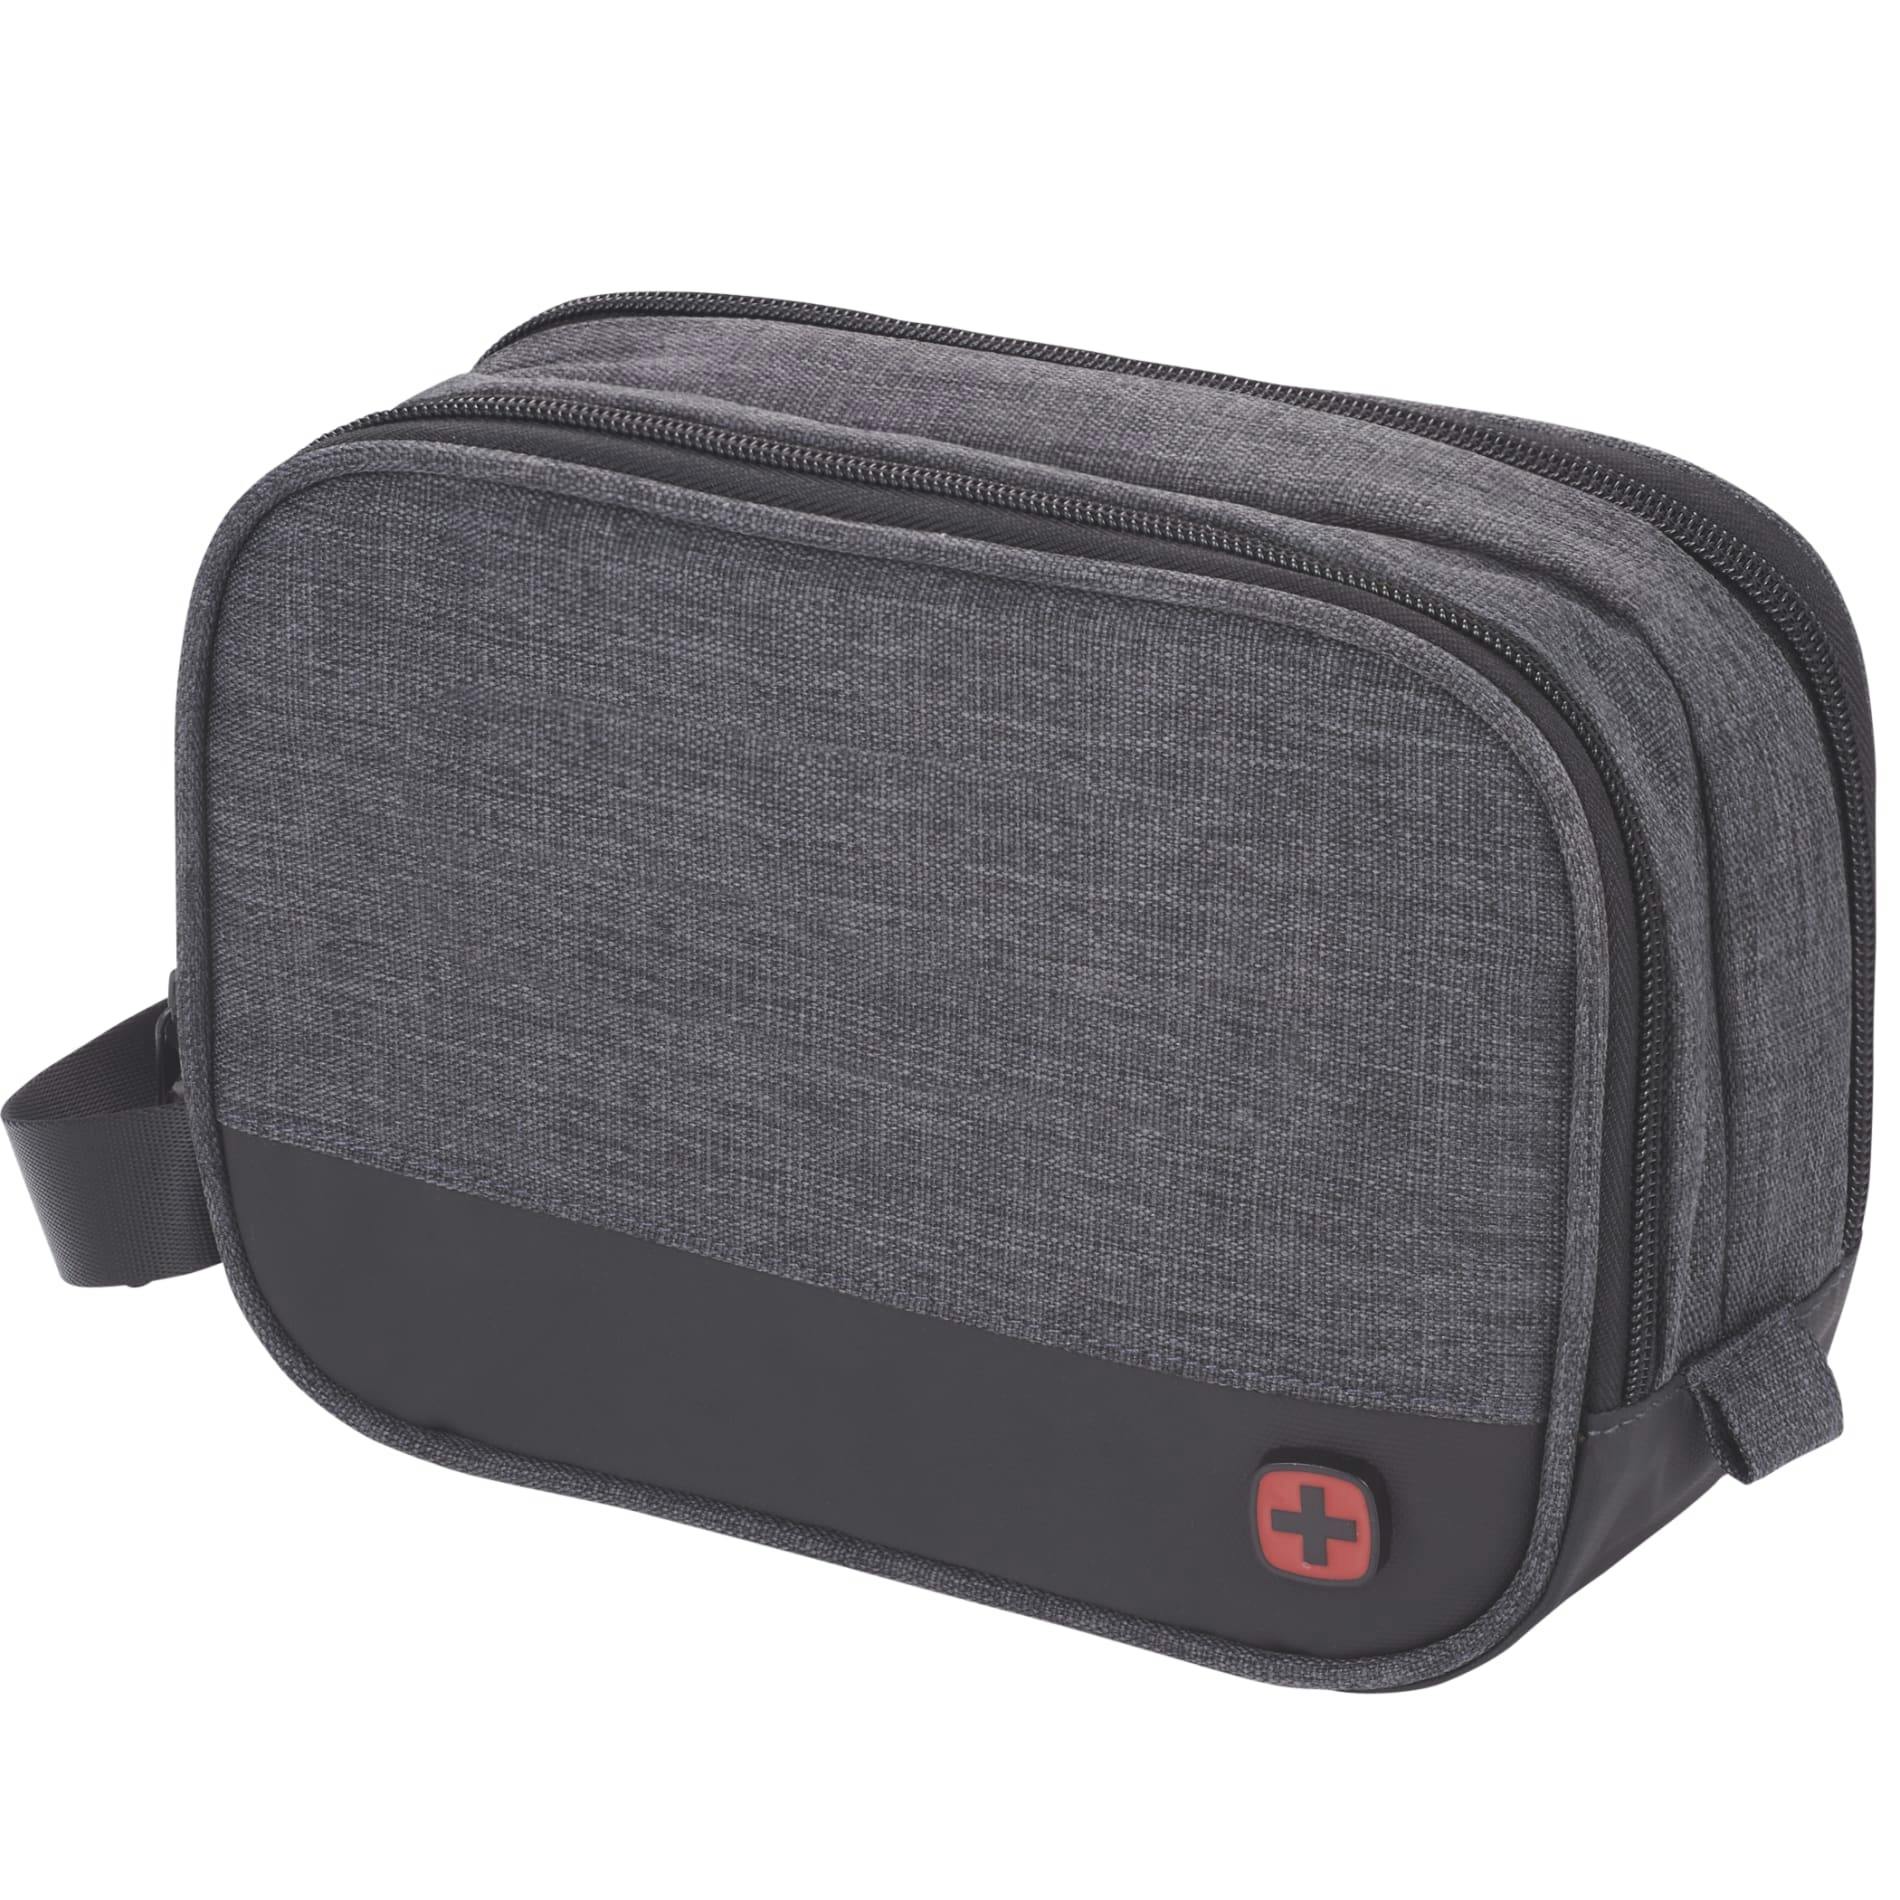 Wenger RPET Dual Compartment Dopp Kit - additional Image 5